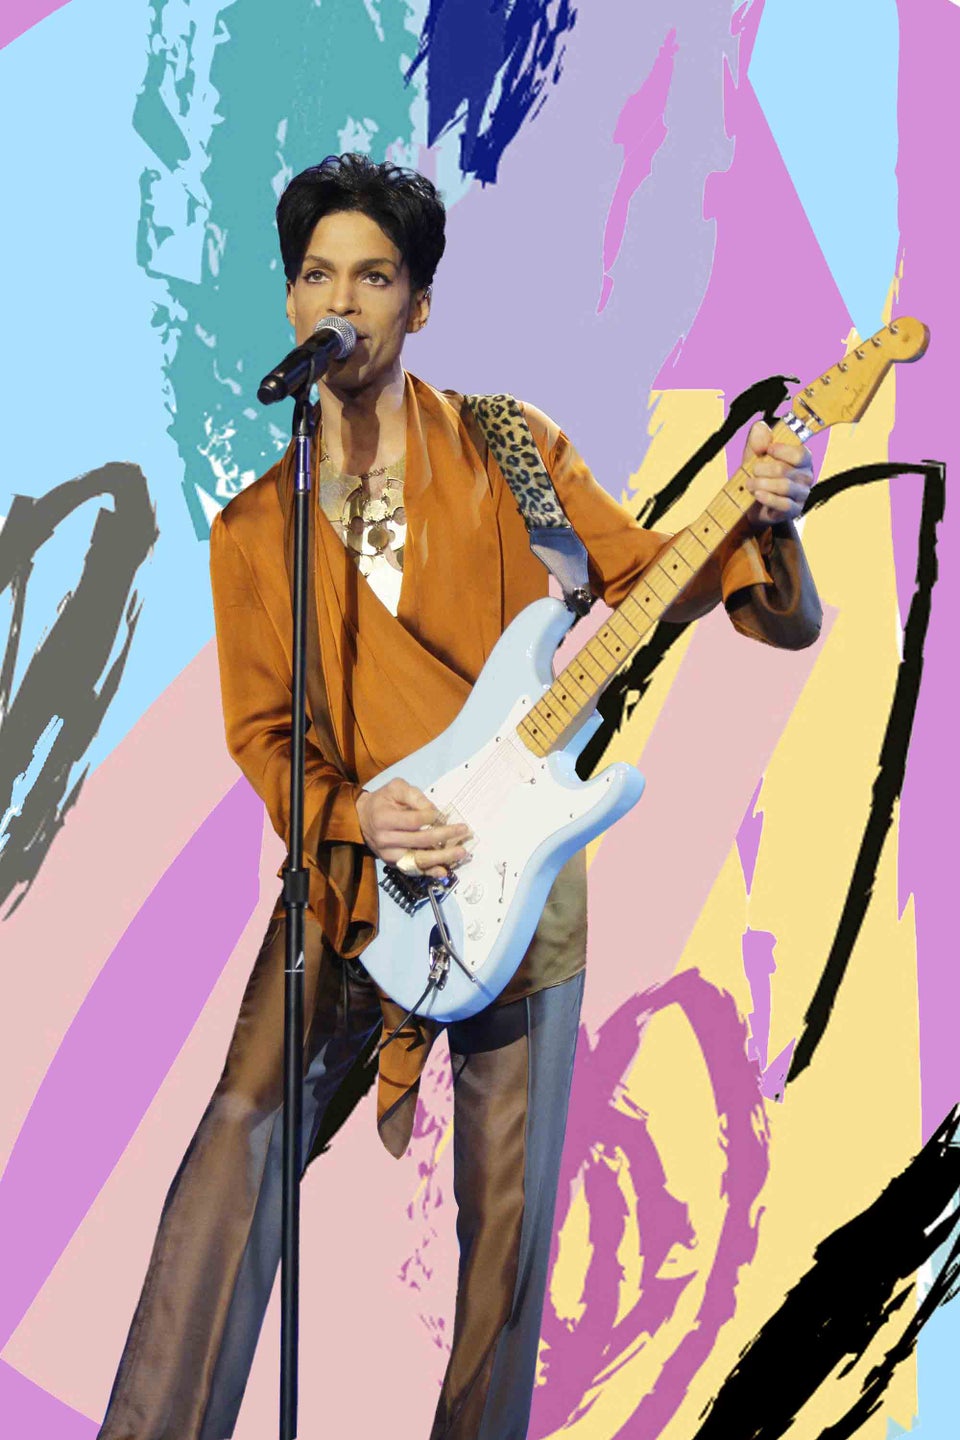 Prince’s Estate Announces Special Concert Featuring Unreleased Material